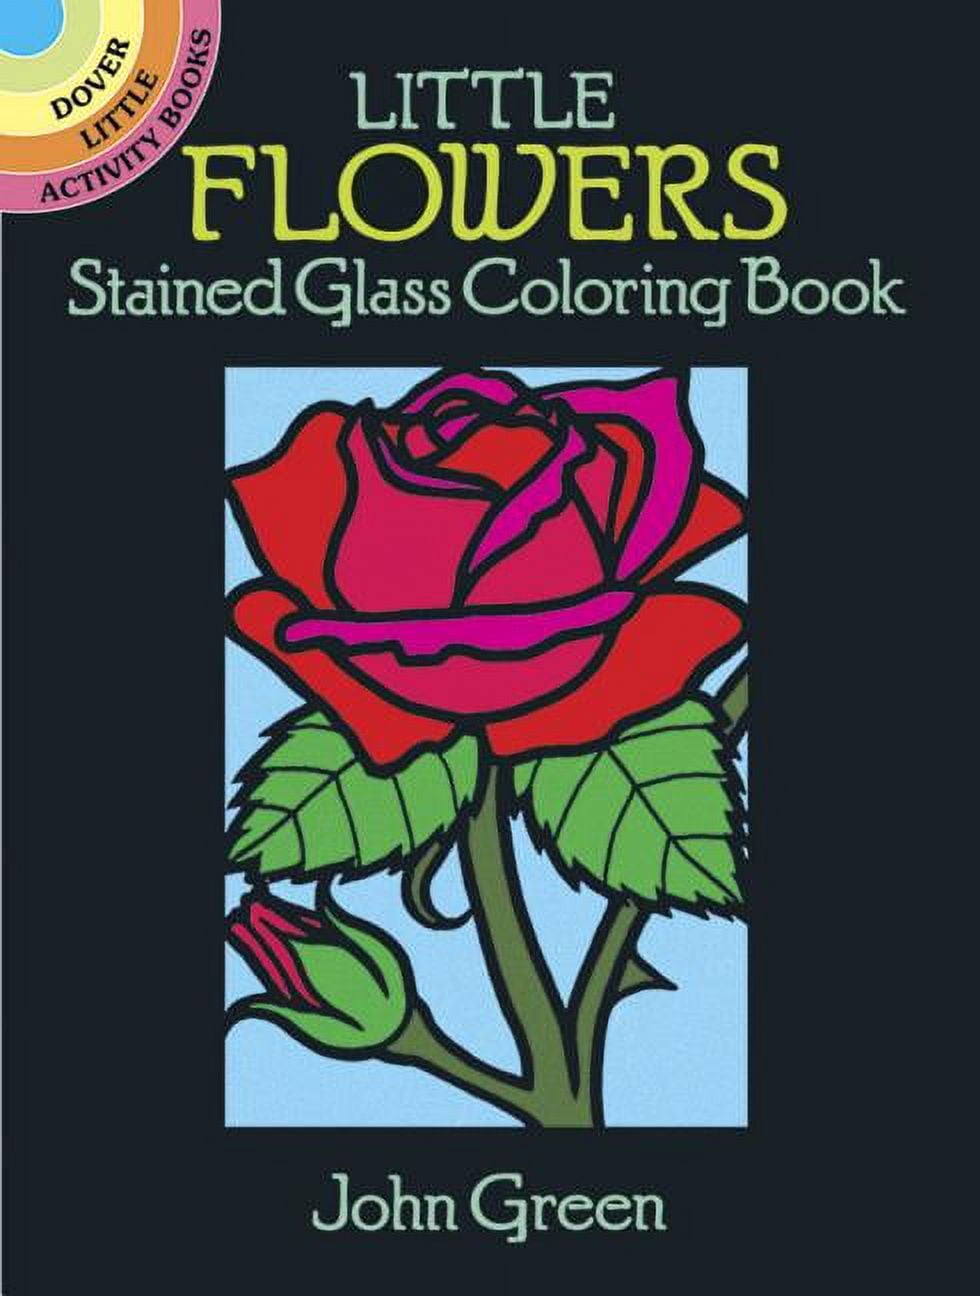 Adult Coloring Books for Anxiety and Depression: 300 Stained-glass Owl  Portrait Coloring Pages: Find Comfort in the Gaze of 300 Stained-Glass Owl